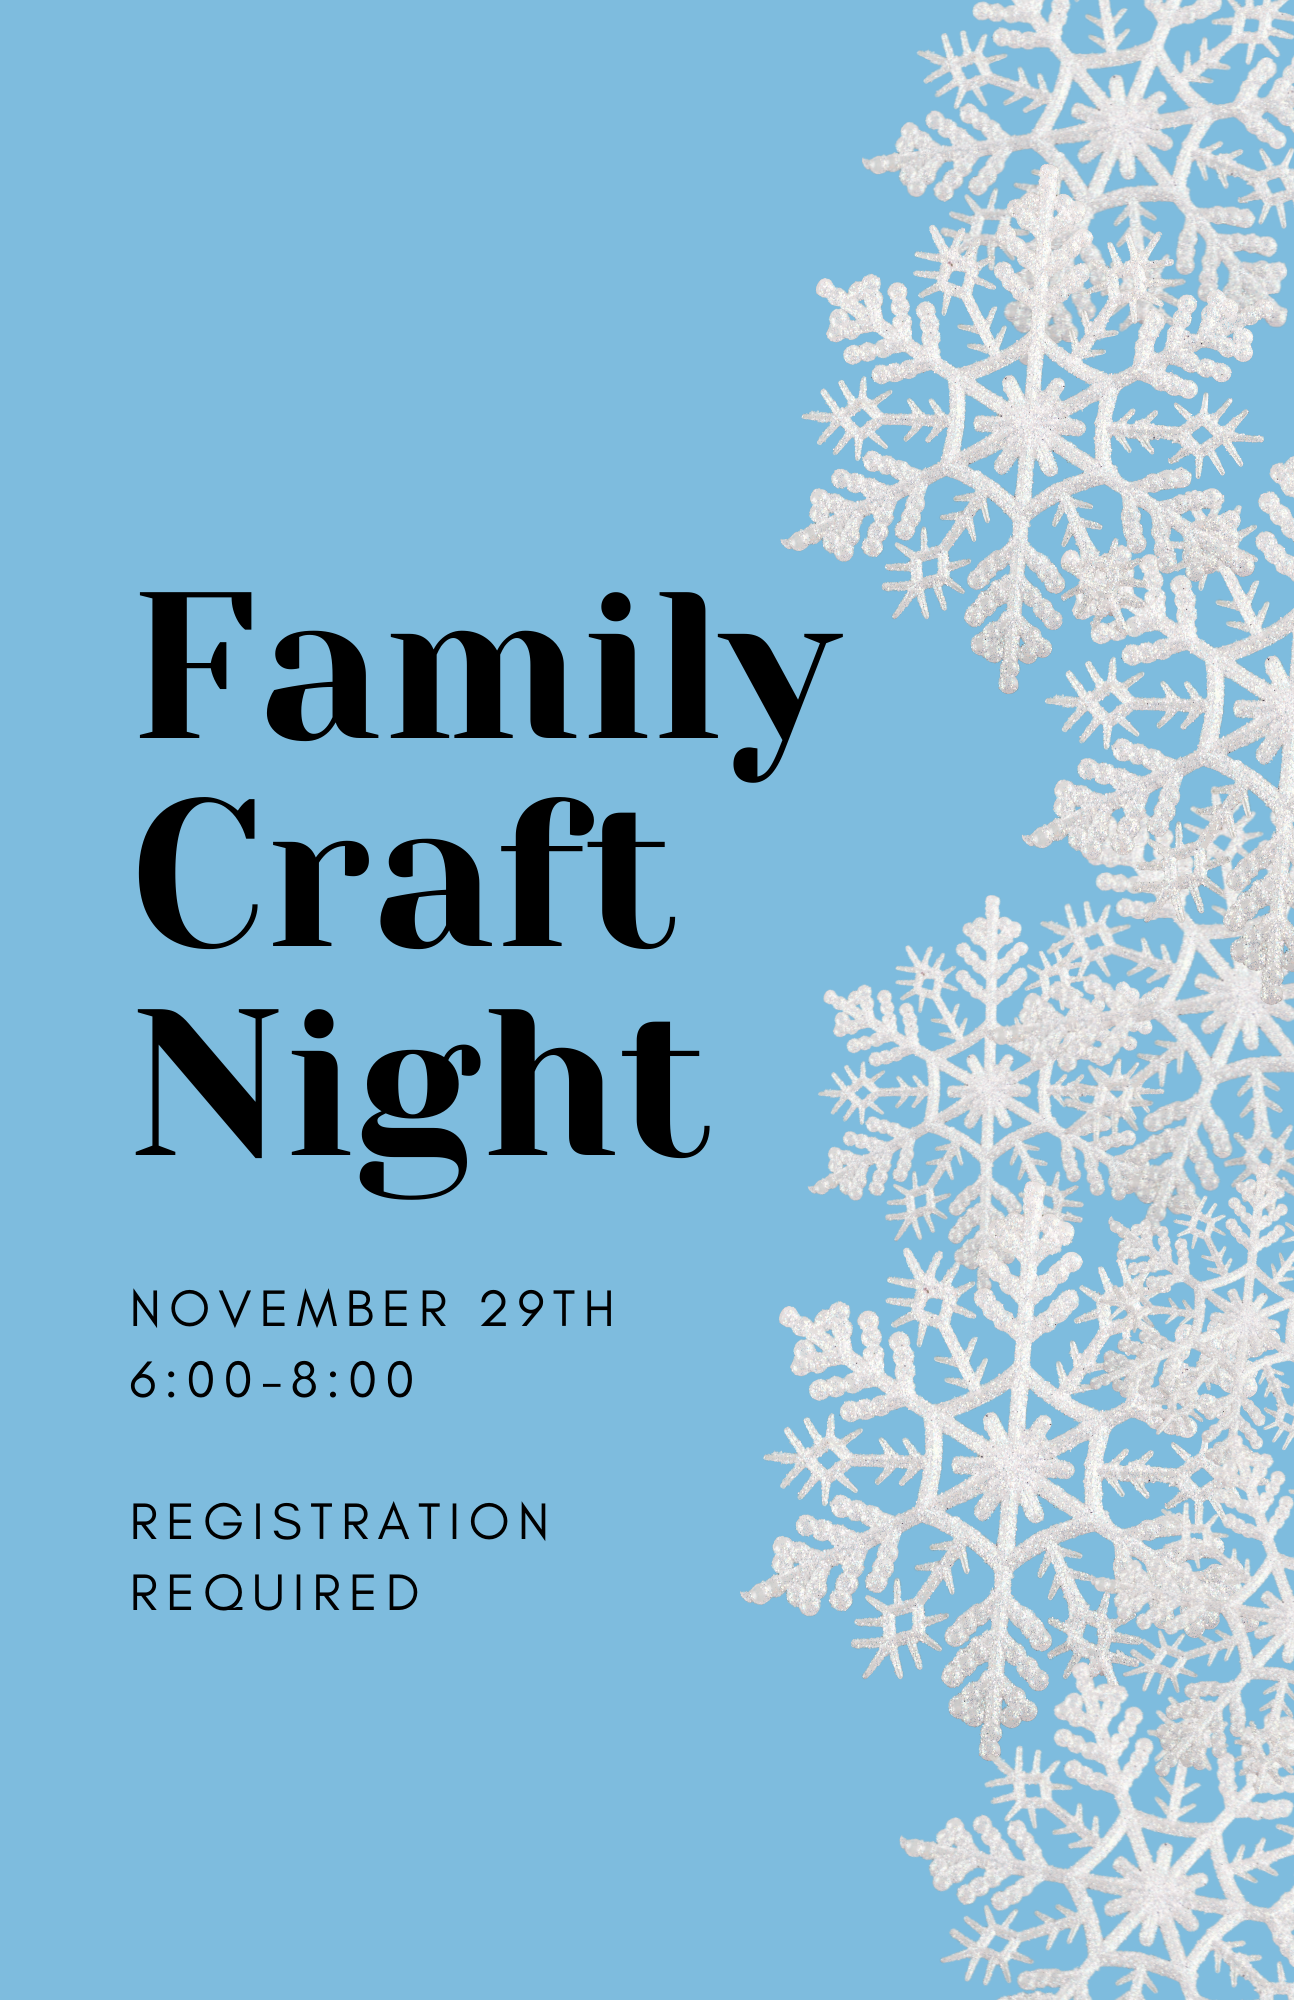 light blue background with snowflakes along the right side of the image.  Text:  Family Craft Night; November 29th; 6:00-8:00, registration required